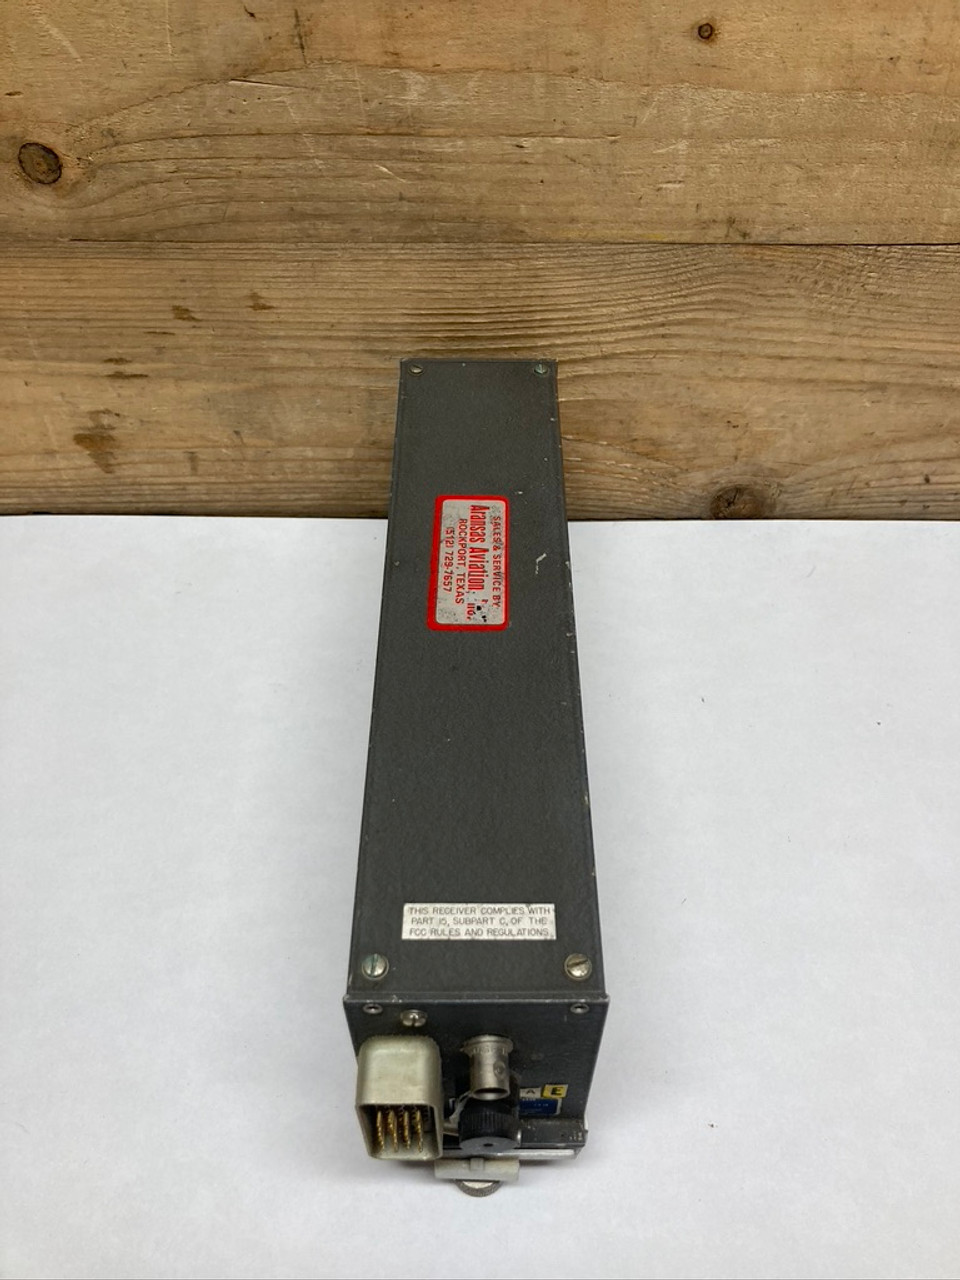 ARC R-443B Glide Slope Receiver (with Mount) 42100 Aircraft Radio